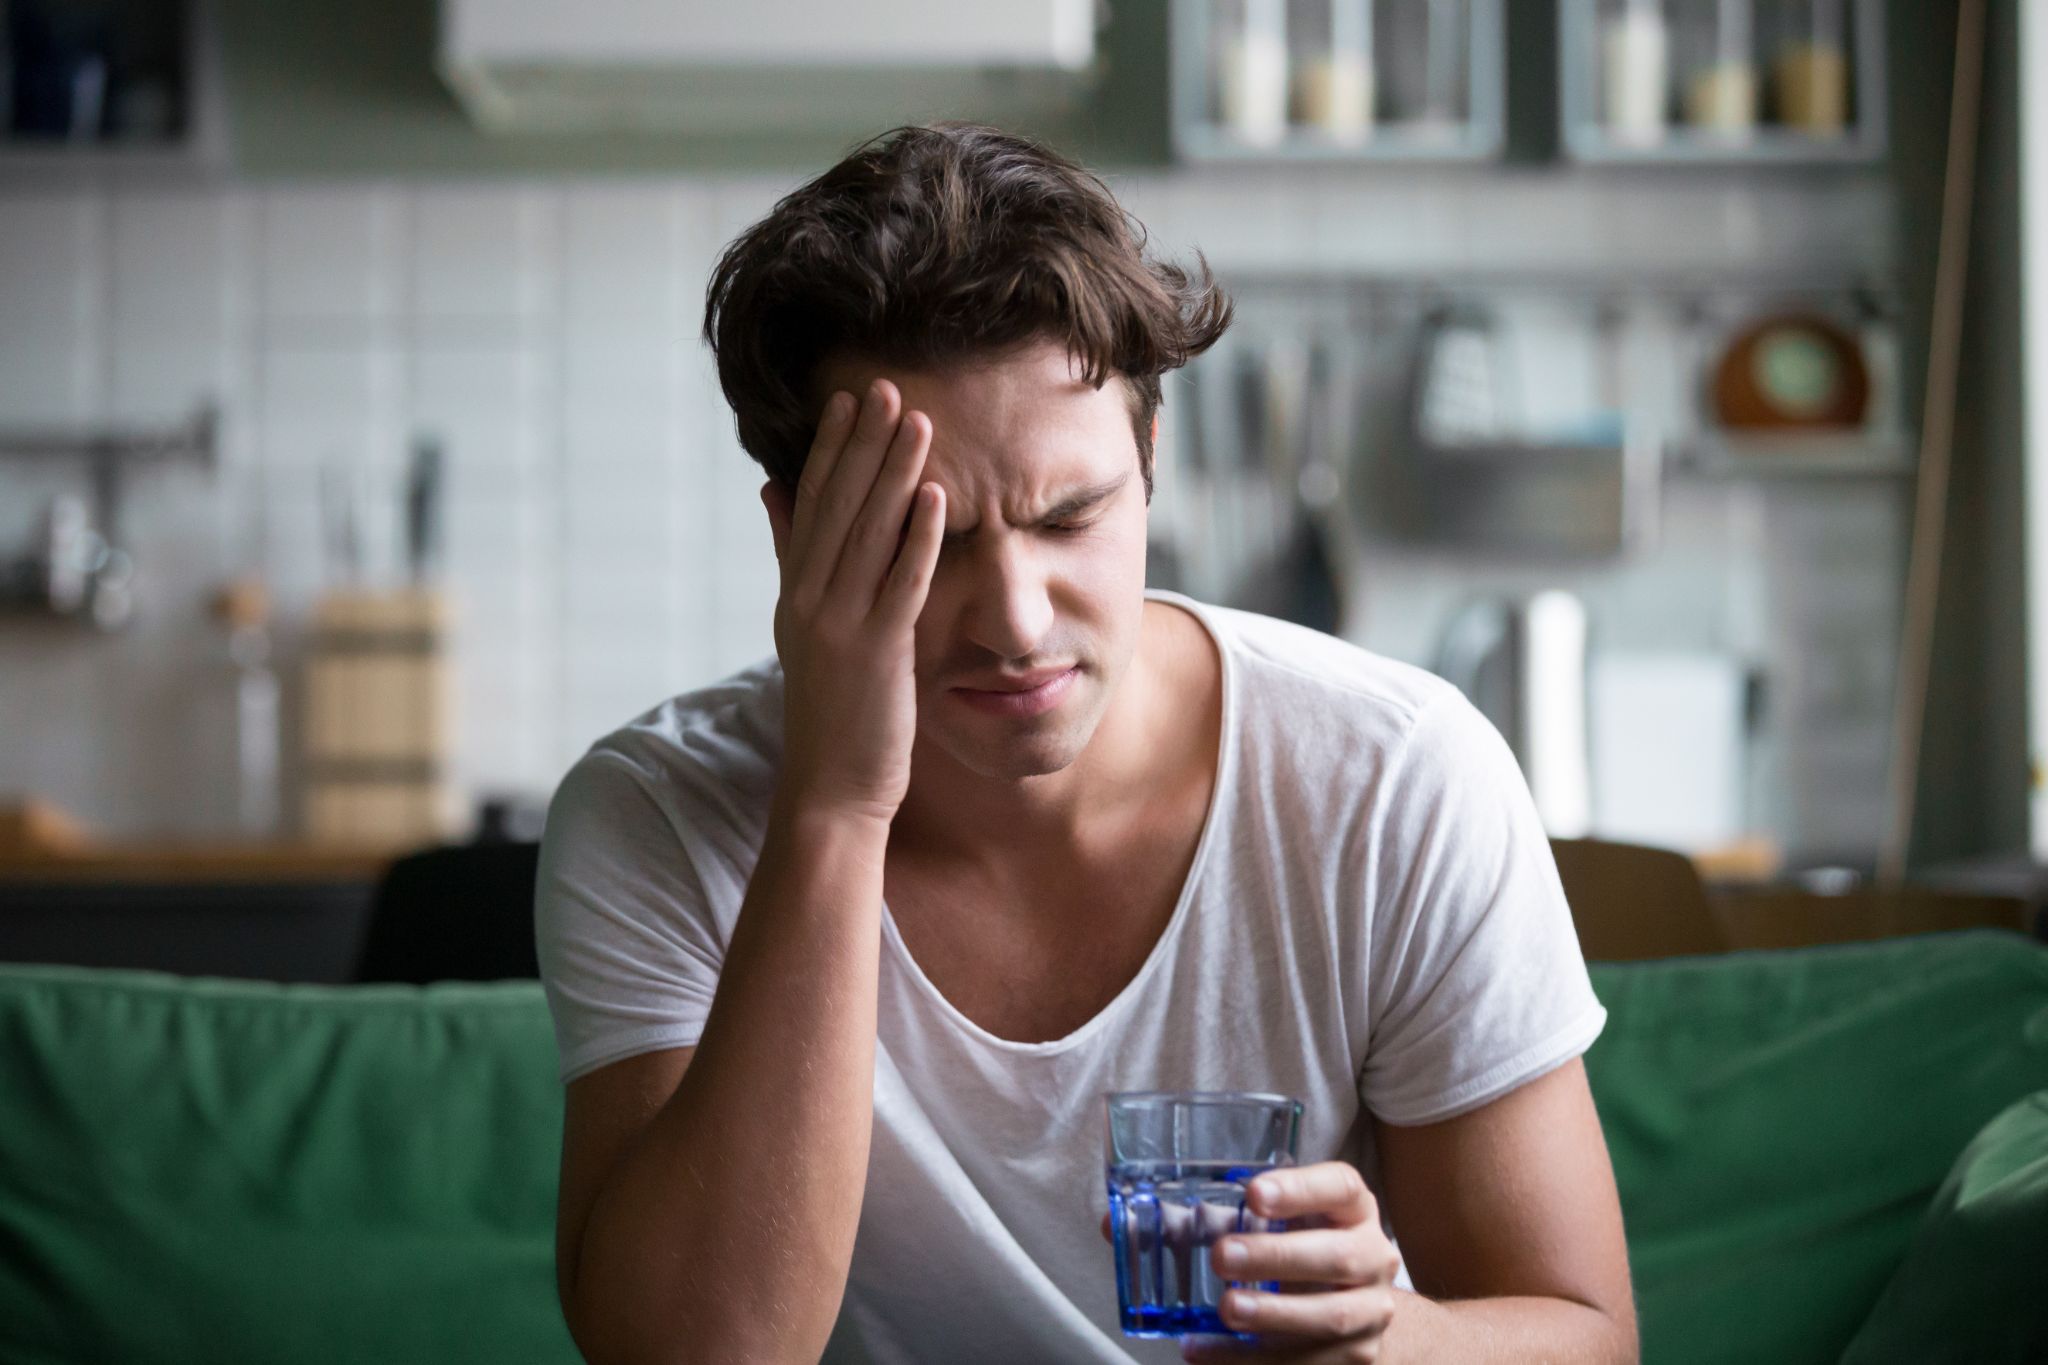 Young man suffering from strong headache sitting with glass of water